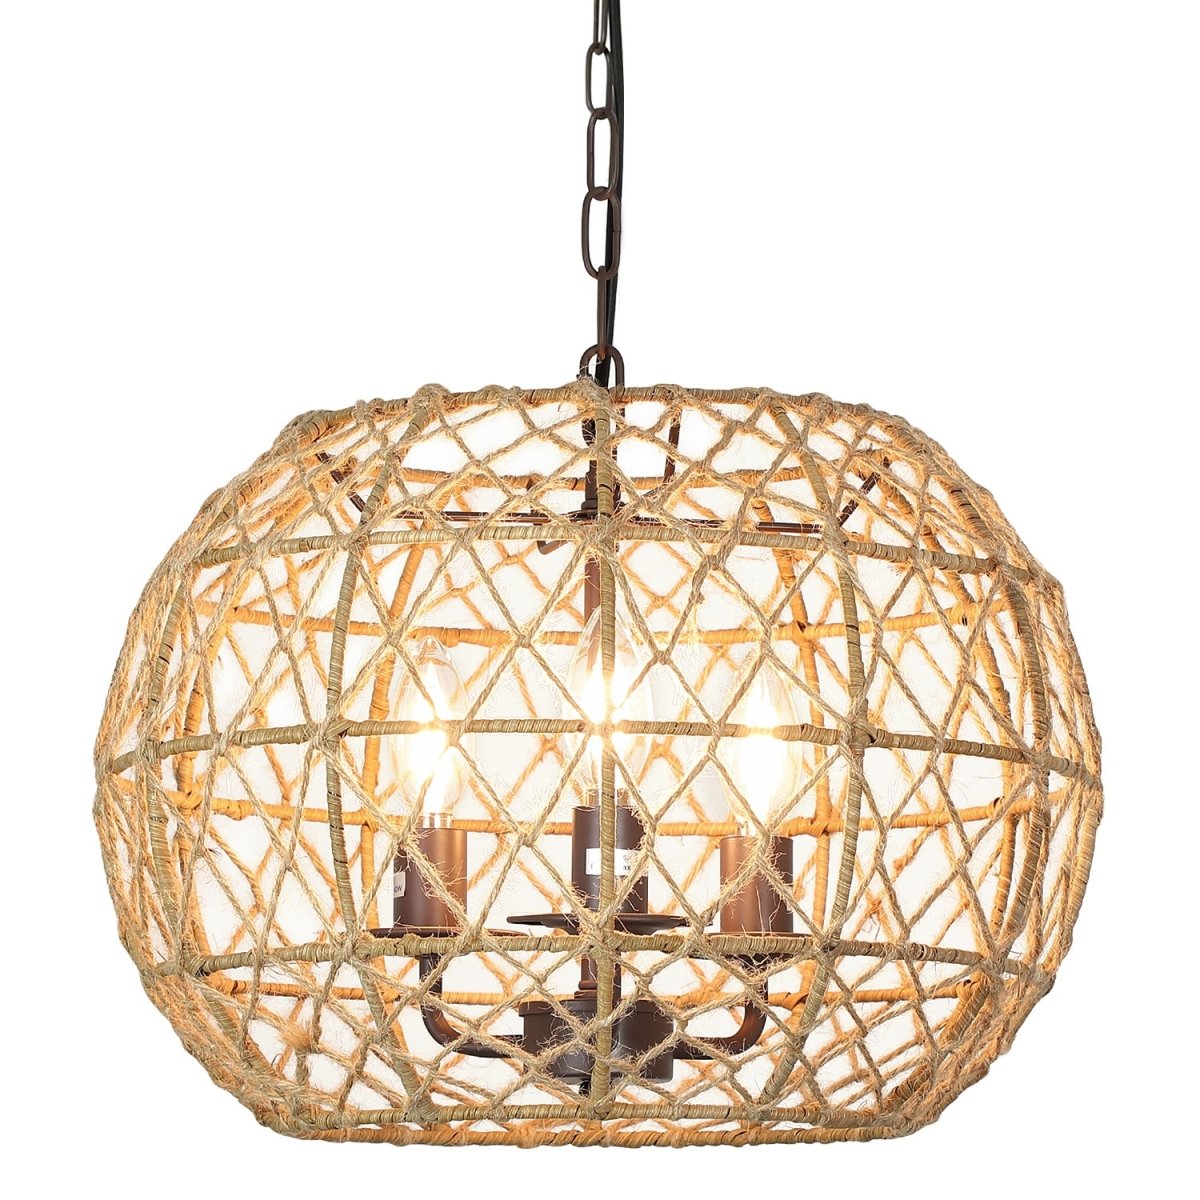 Depuley Rustic Woven Pendant Light, 3-Light Metal Basket Hanging Lights Fixture with Hemp Rope Finish, 39 Inch Adjustable Chain Vintage Chandeliers for Kitchen/Dining Table/Living Room - WS-FND90-40B 1 | DEPULEY